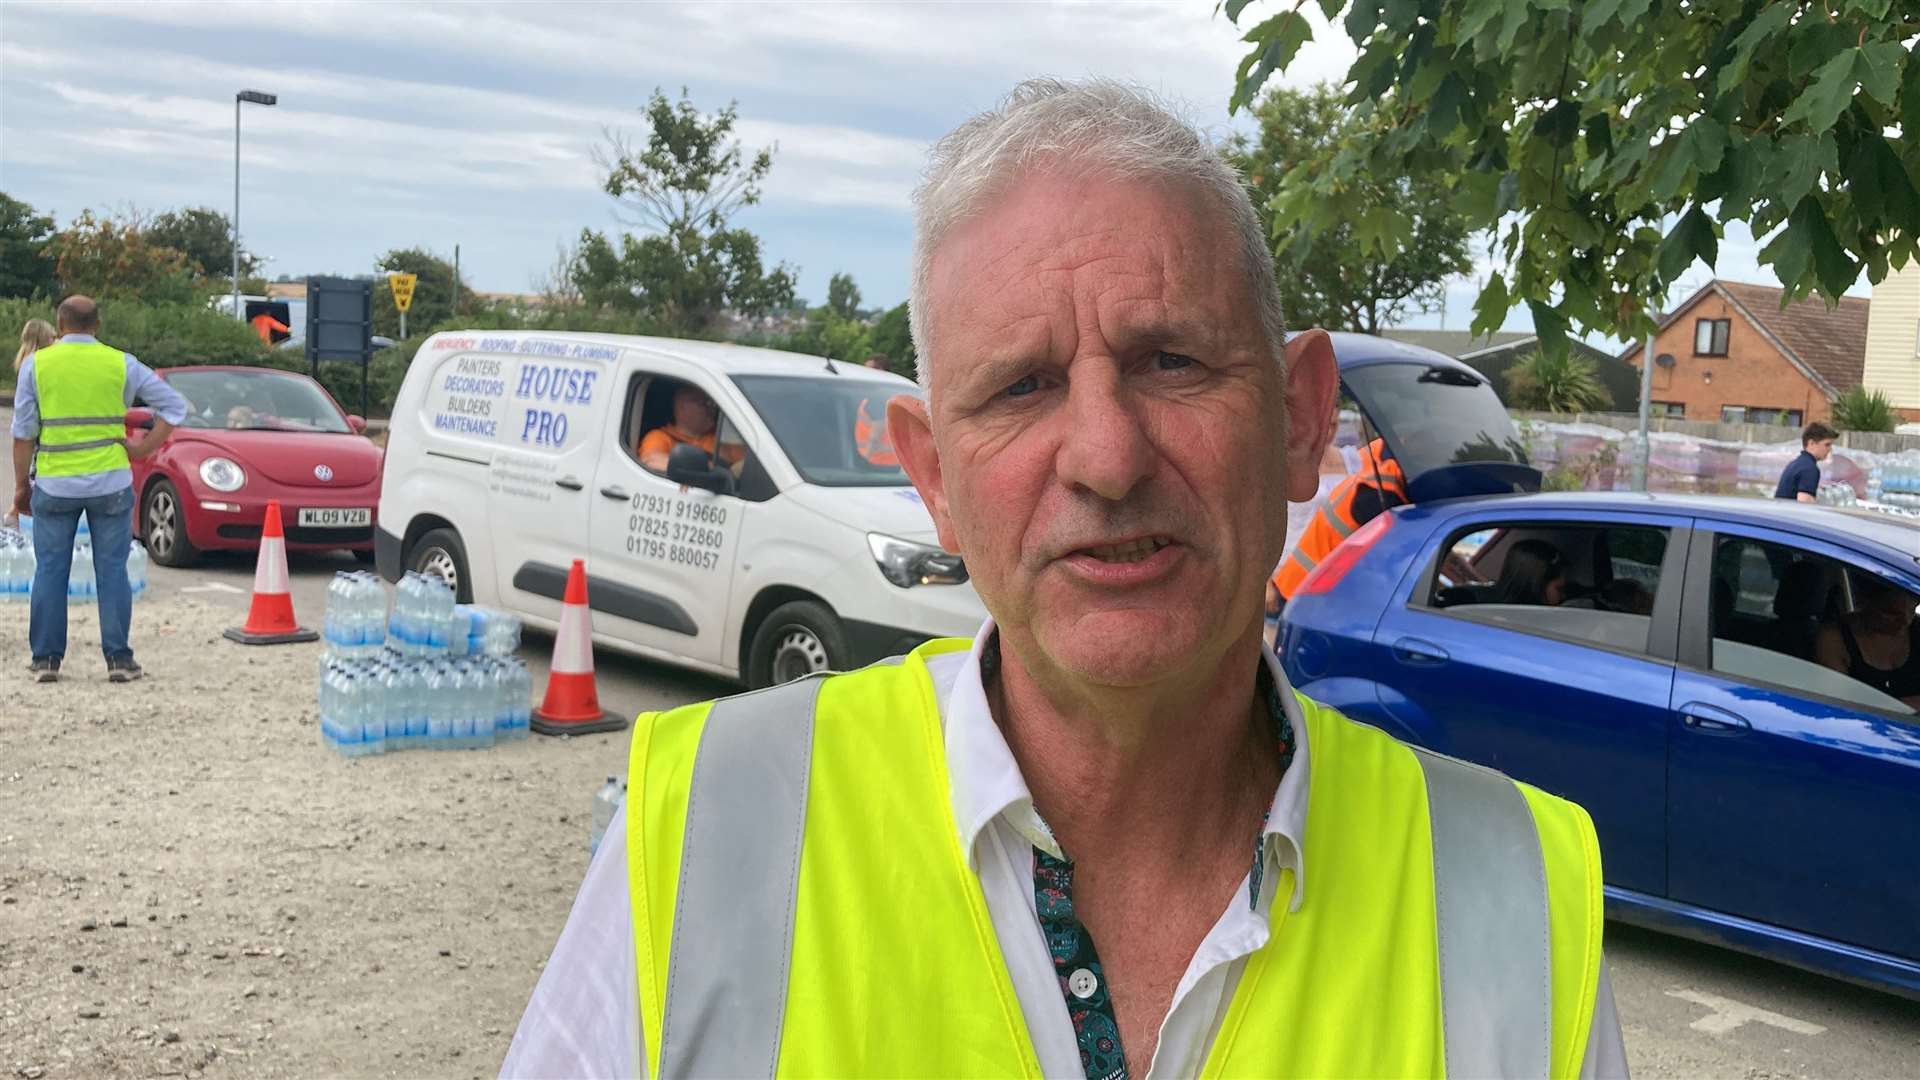 Southern Water's Simon Fluendy said the leak had sprung at the weekend and repaired but returned on Monday evening